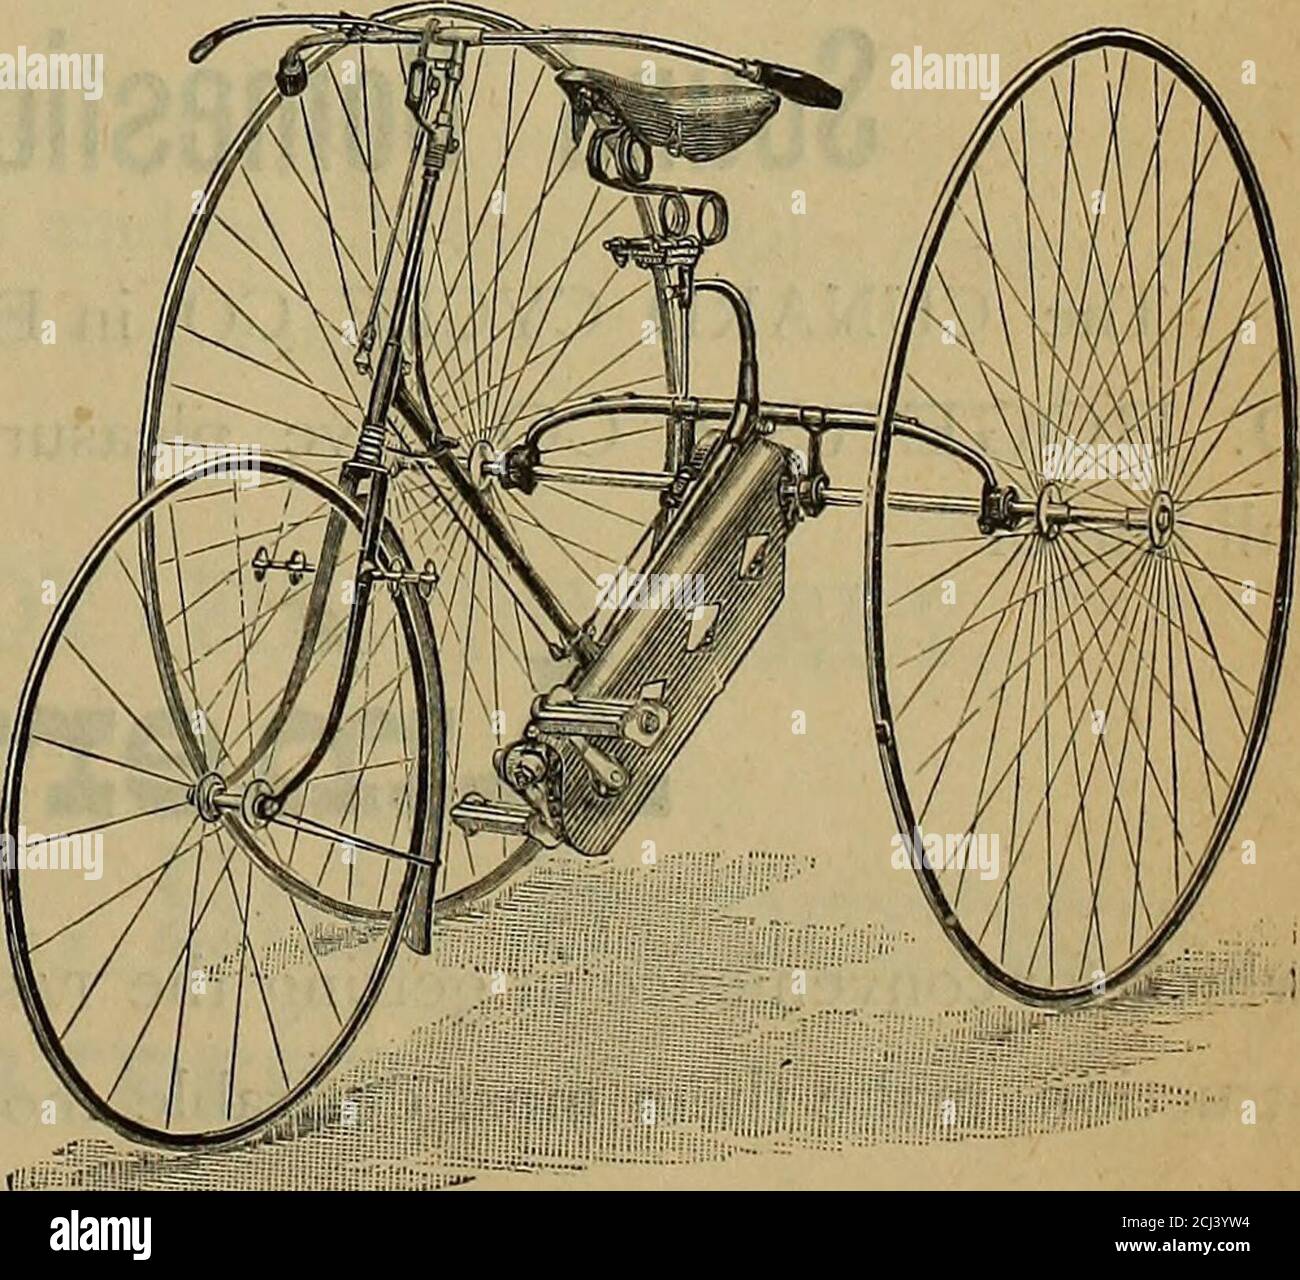 . The bicycling world . A FINE LOT —OF— SECONDHANDS —AT— VEKY liOWPRICES, S. S. S. NO. 3. Staunch, Safe, Reliable.Easy to Ride. A Superb HiUCliniber.Otto Tire. Bicycles, Tricycles, Safeties.. For Ladies and Light Weiifht Gents. Light and well made-Four Bearing Axles. Otto Tire. W. B. EVERETT & CO., Sole U. S. Agents, 6 and 8 Berkeley Street, Boston. i84 THE BICYCLING WORLD i July, 1887. IMPORTANT NOTICE. To some it will be patent, to others a surprise, to learn that D. ROGKRS &: CO. proposerelinquishing the sole agency for the CUNARD CYCLKS as soon as the orders in hand aredelivered, in conseq Stock Photo